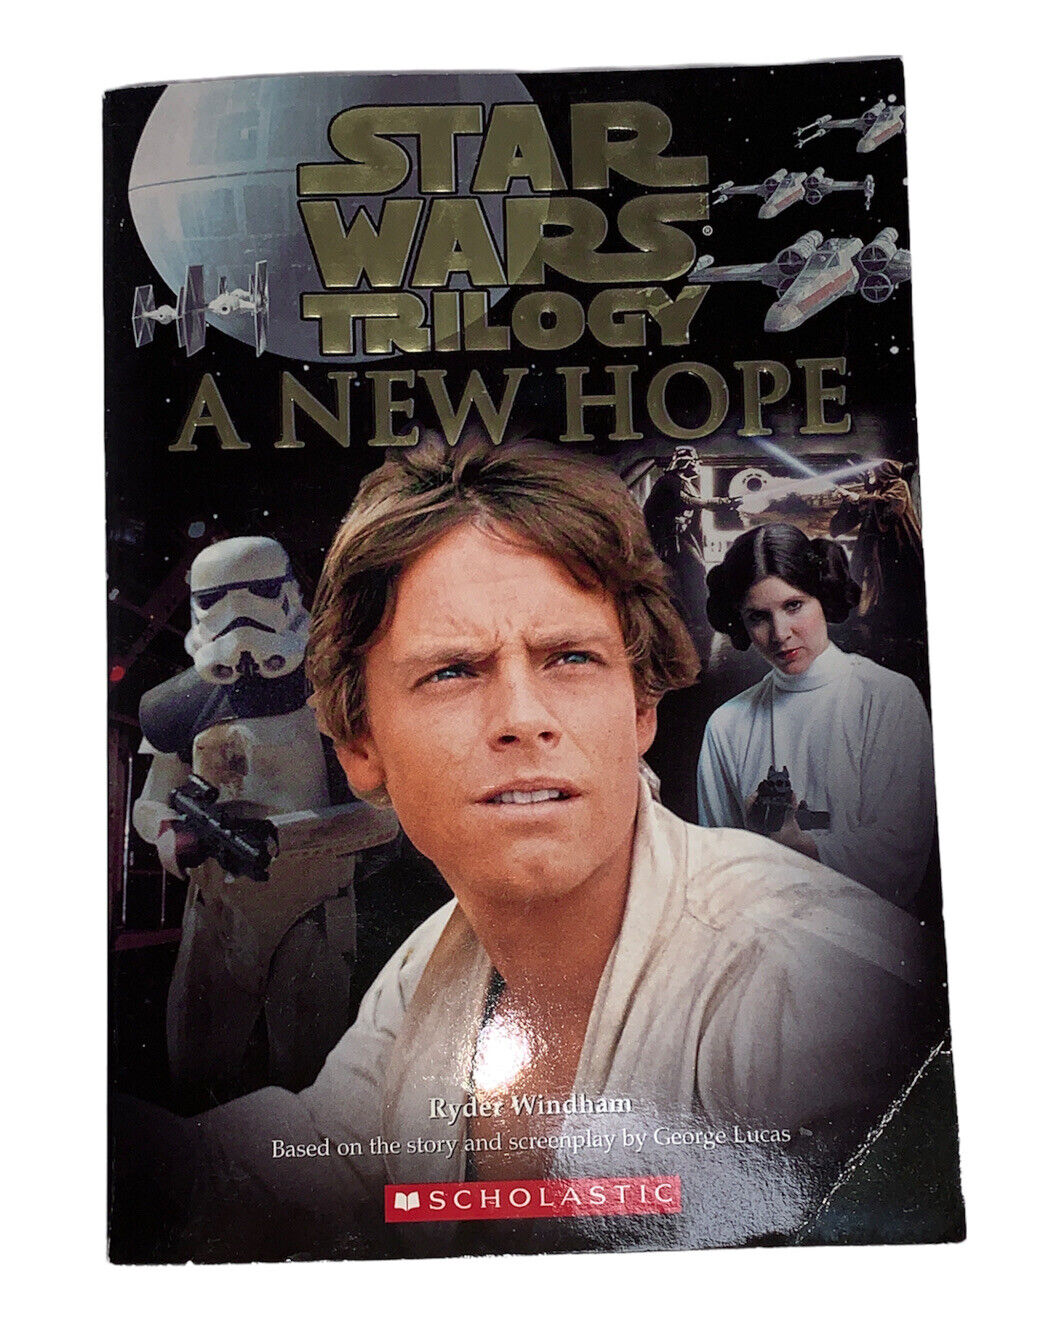 Star Wars Trilogy A New Hope Paperback Book Vintage 2004 with Color Page Inserts